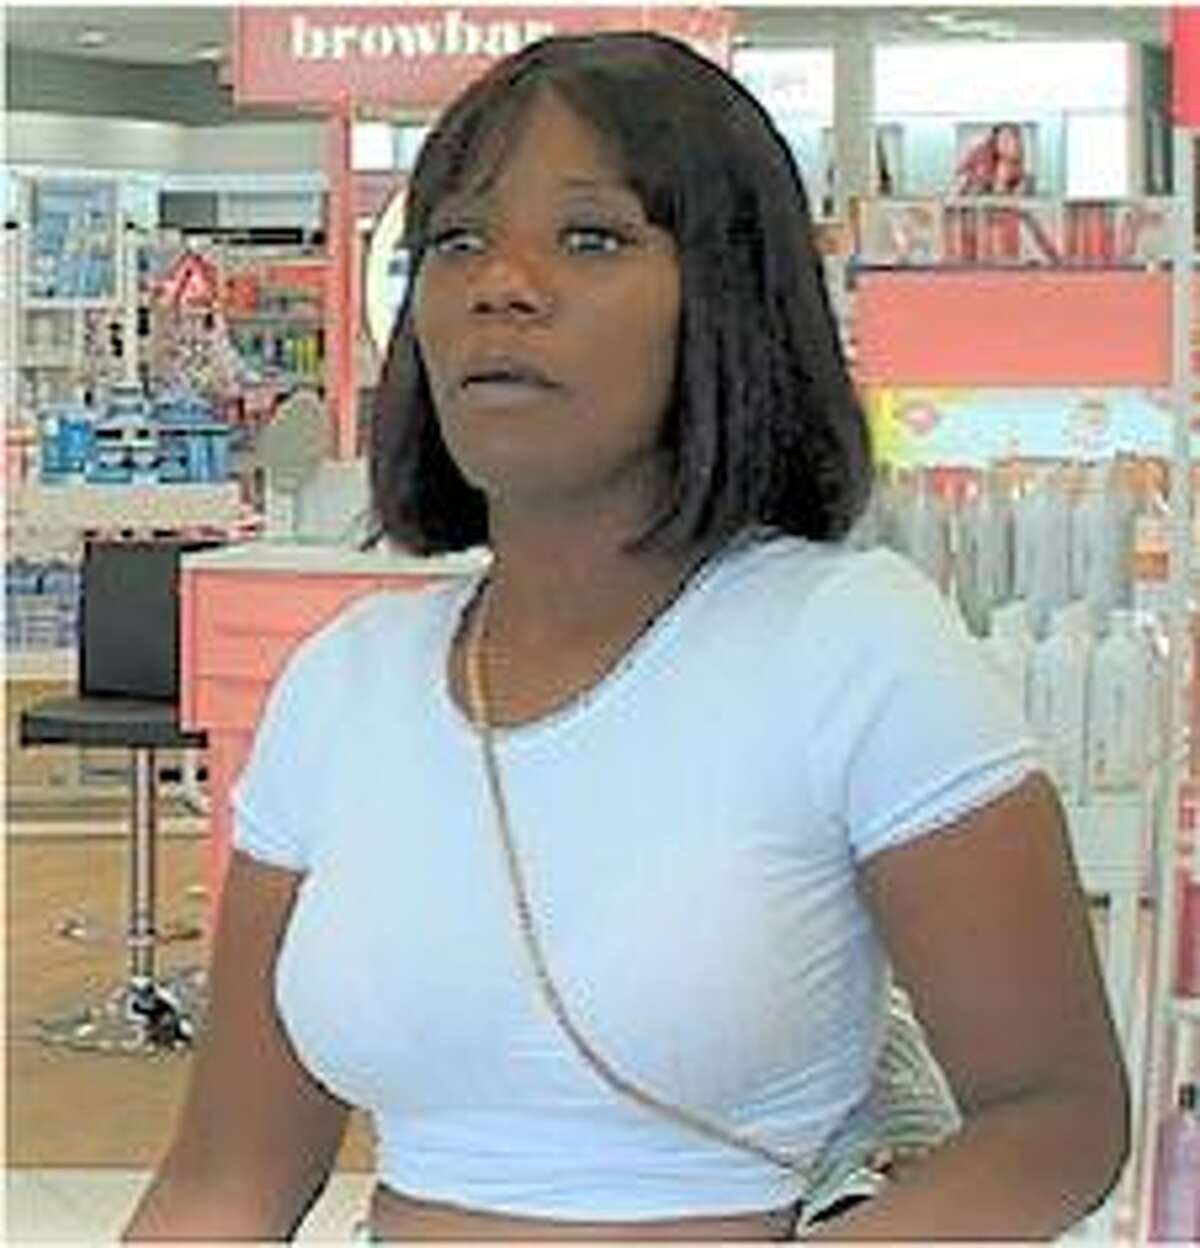 The Fort Bend County Sheriff's Office is seeking the public's help in identifying this suspect in relation to thefts at Ulta Beauty stores in Richmond.